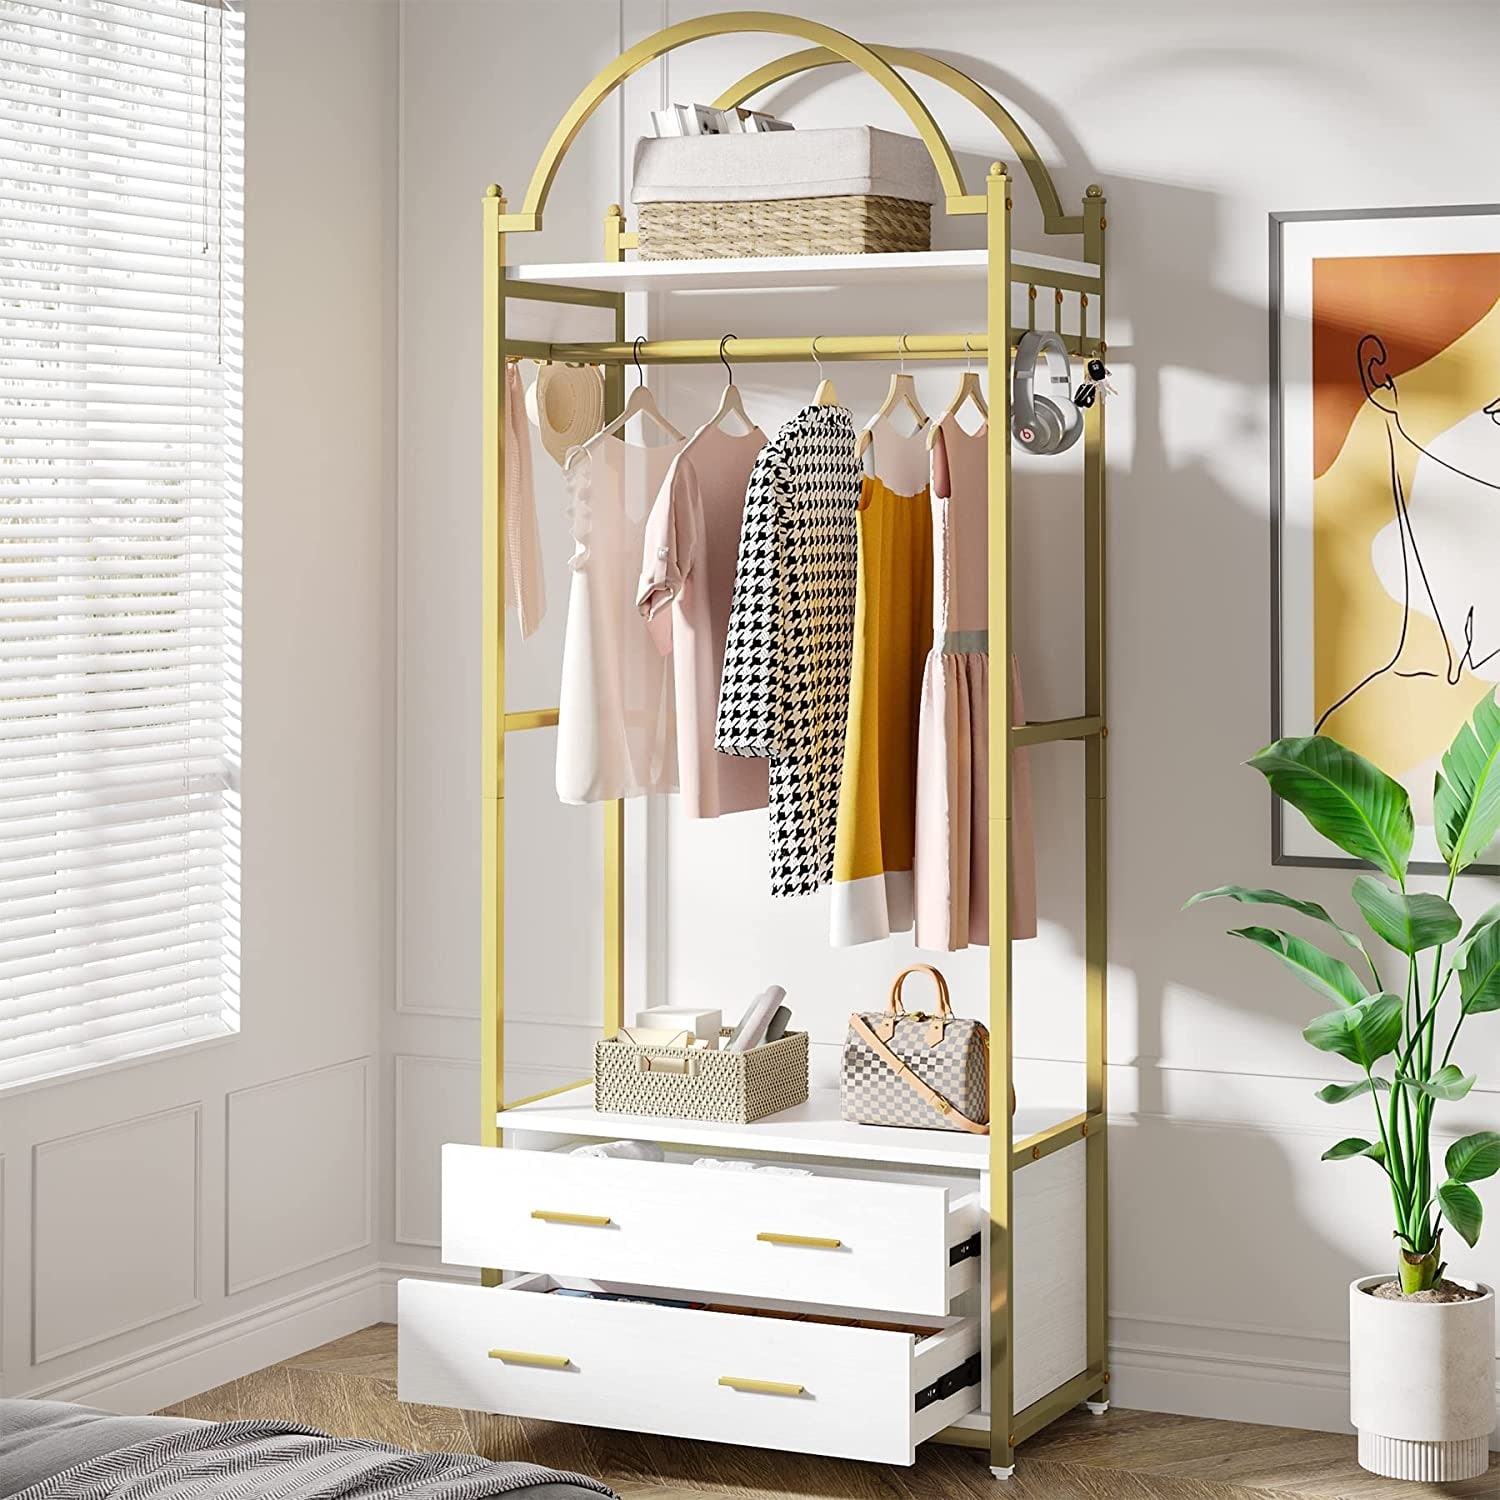 https://ak1.ostkcdn.com/images/products/is/images/direct/d40b9abb2162a892c54e48575547021fee7e7be3/Gold-Clothes-Rack-Shelves-with-Drawers%2C-Modern-Arced-Closet-Organizer.jpg